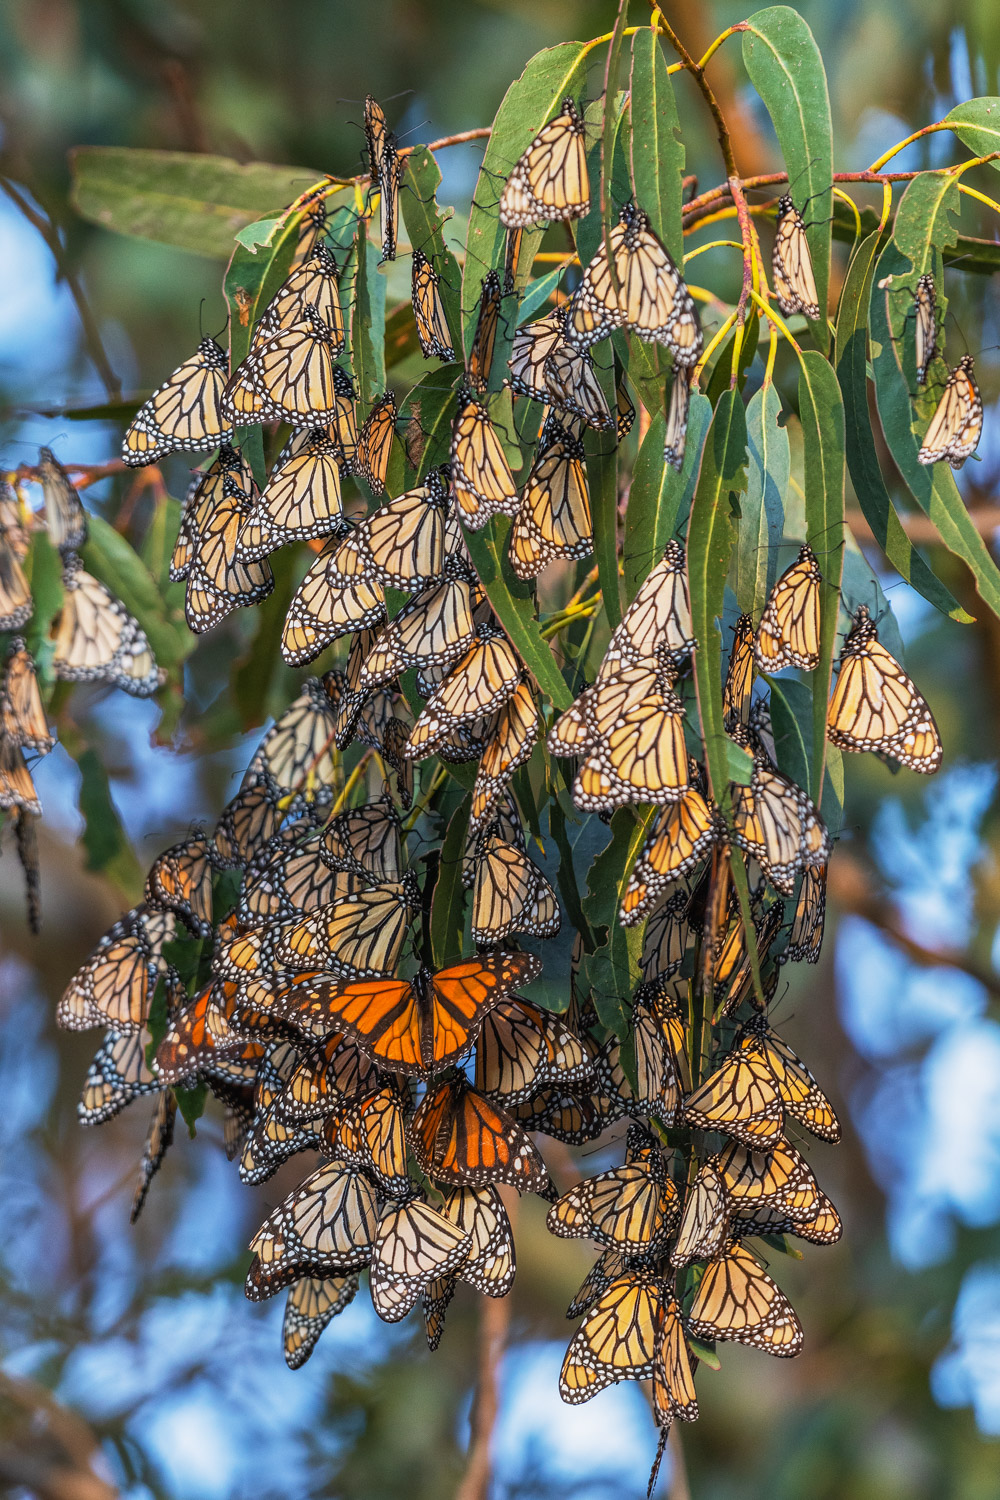 Monarch butterflies huddle together at the Monarch Butterfly Grove in Pismo Beach, CA. In 1997 there were 1.2 million Monarchs...